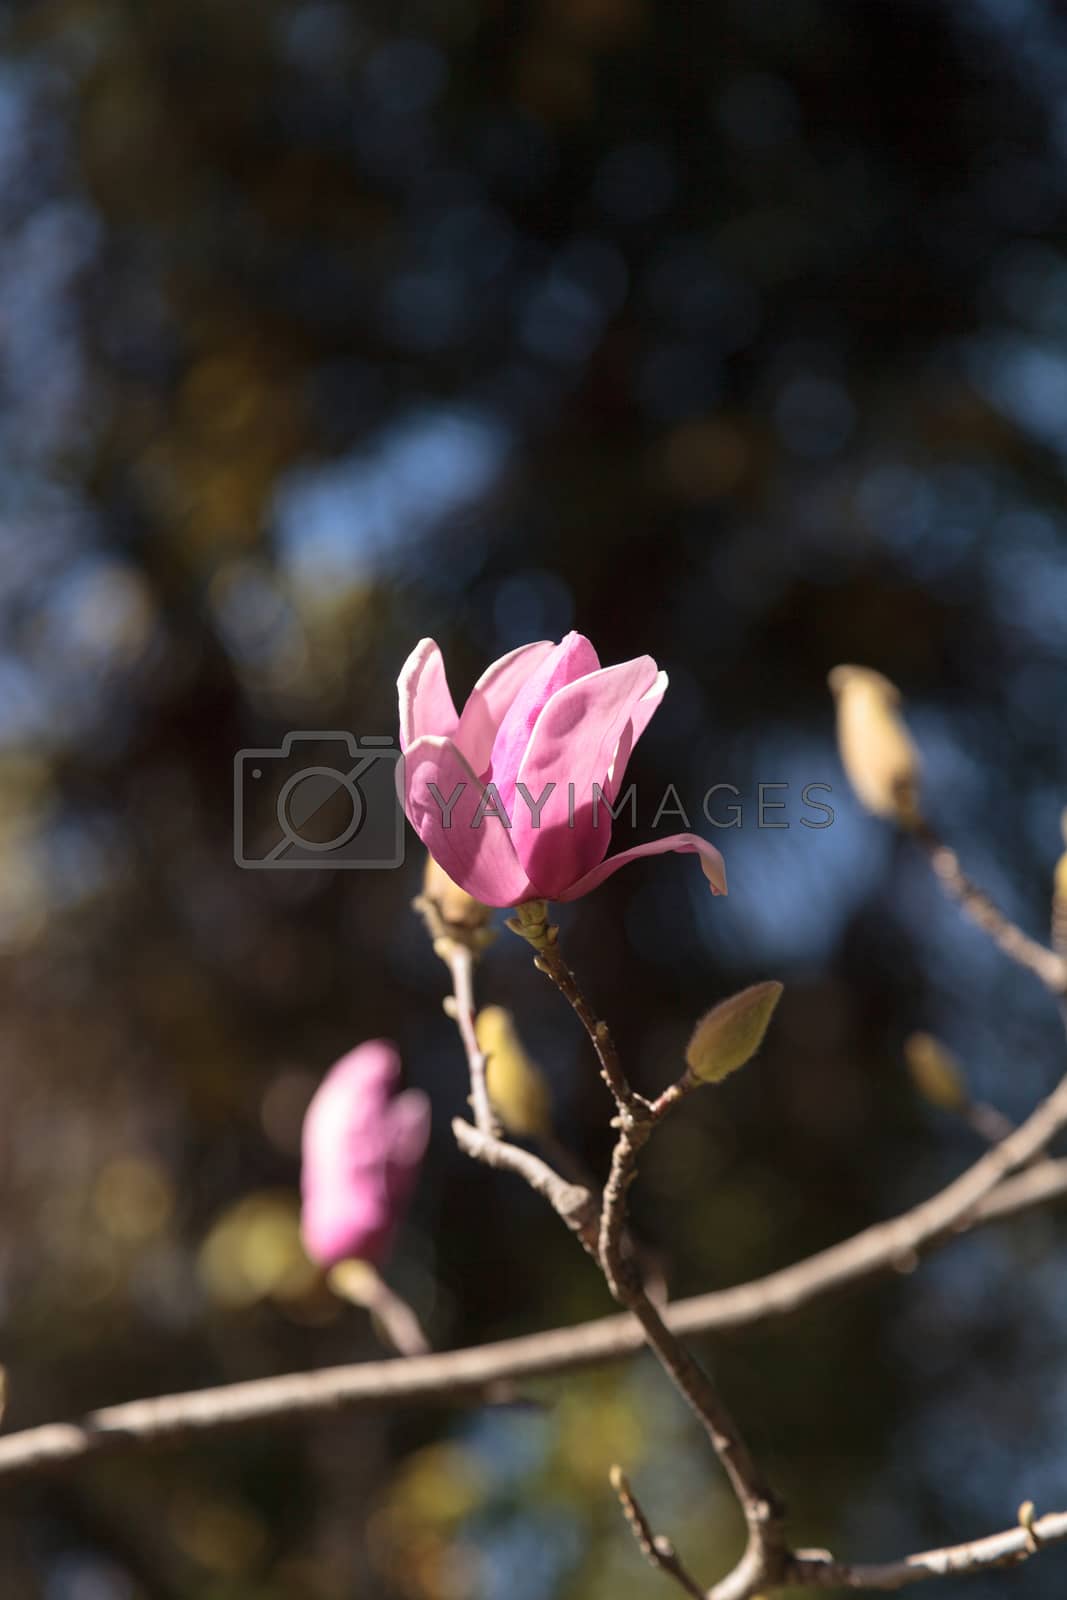 Royalty free image of Pink magnolia flower  by steffstarr